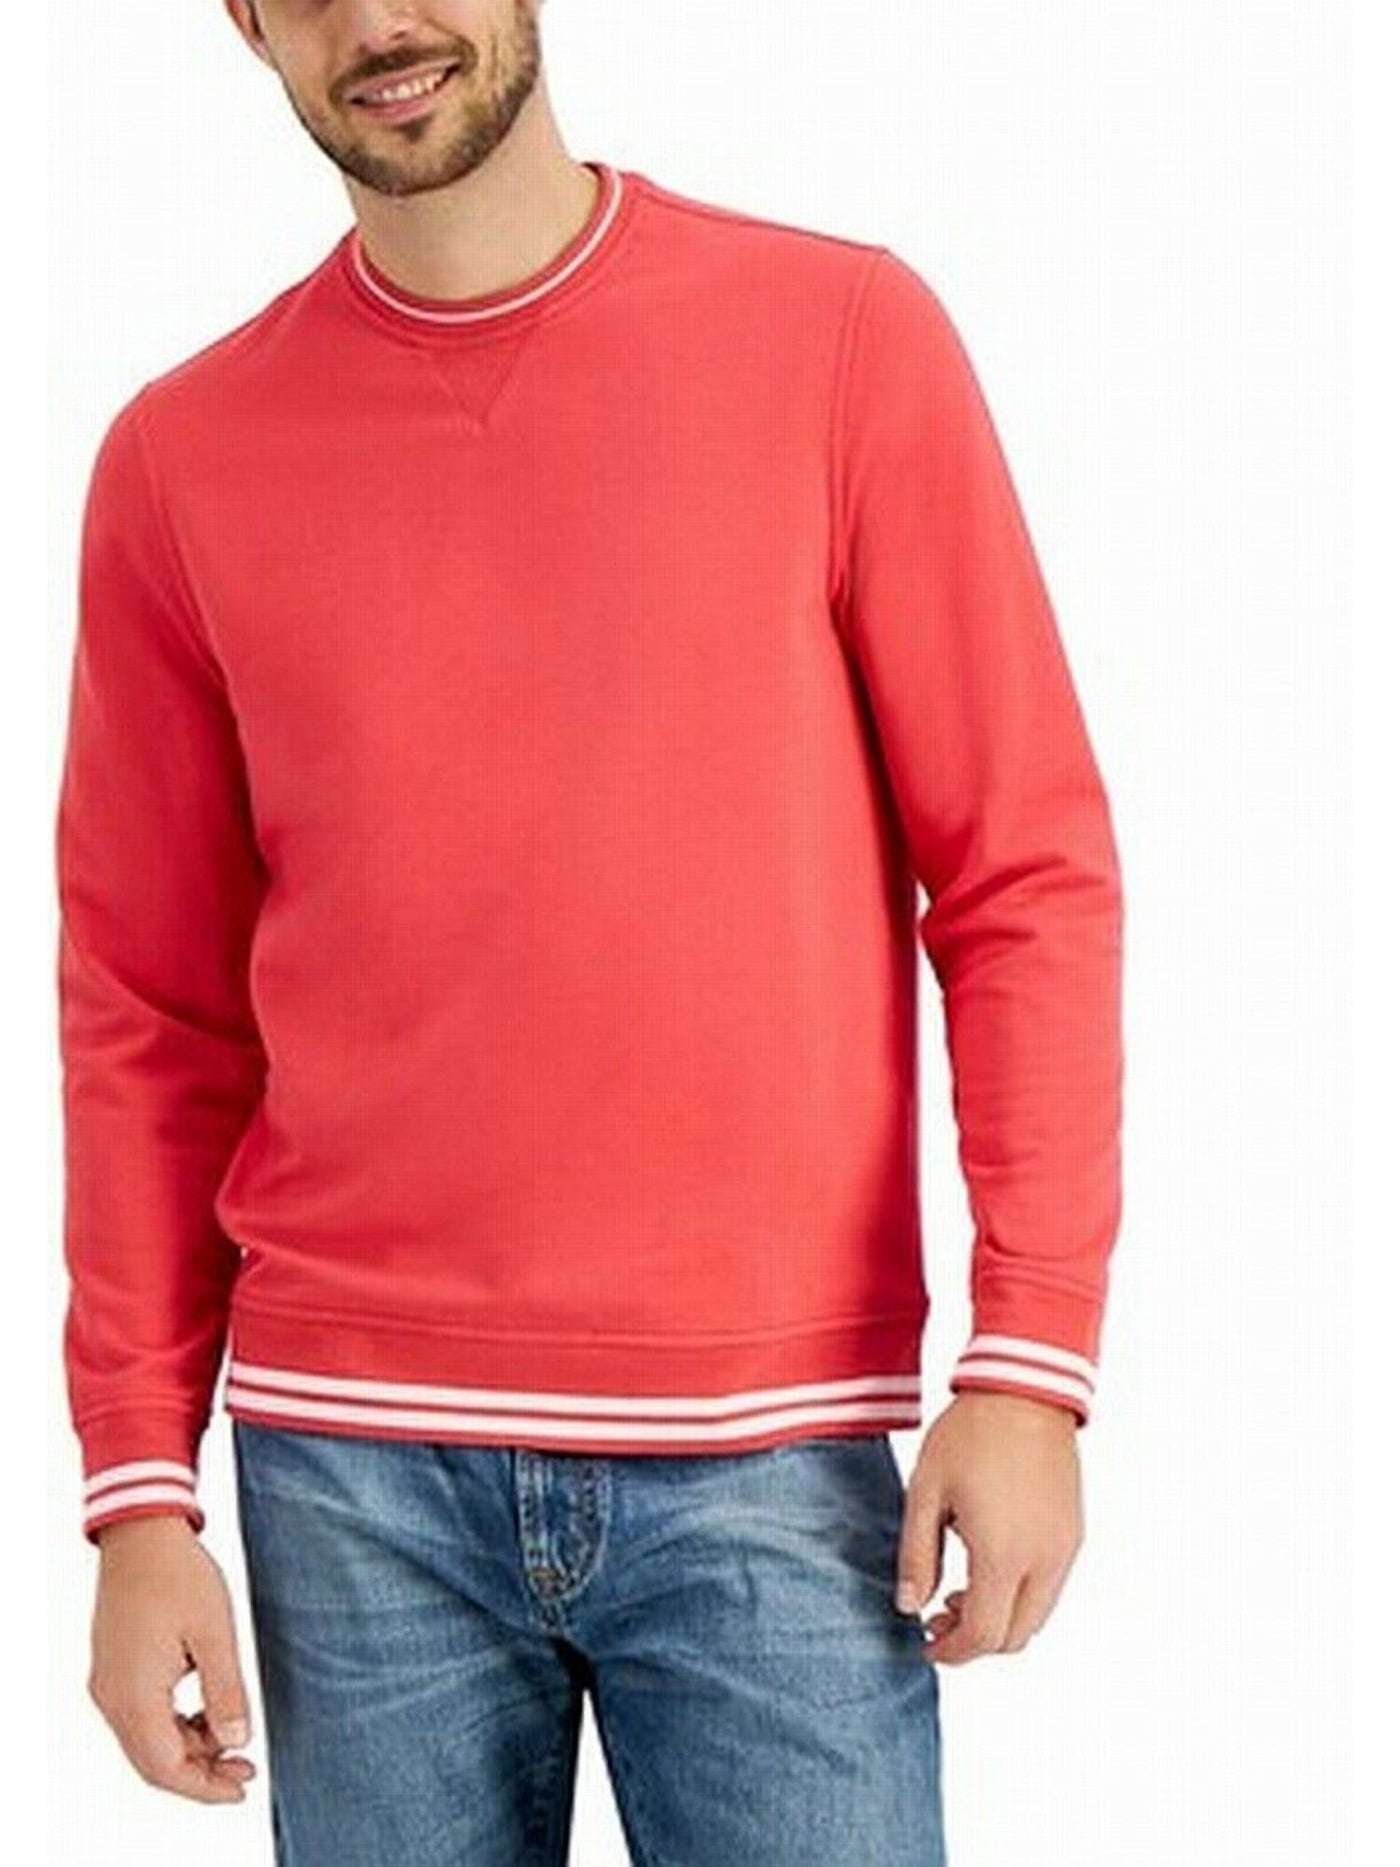 CLUBROOM Mens Red Crew Neck Classic Fit Stretch Sweatshirt S